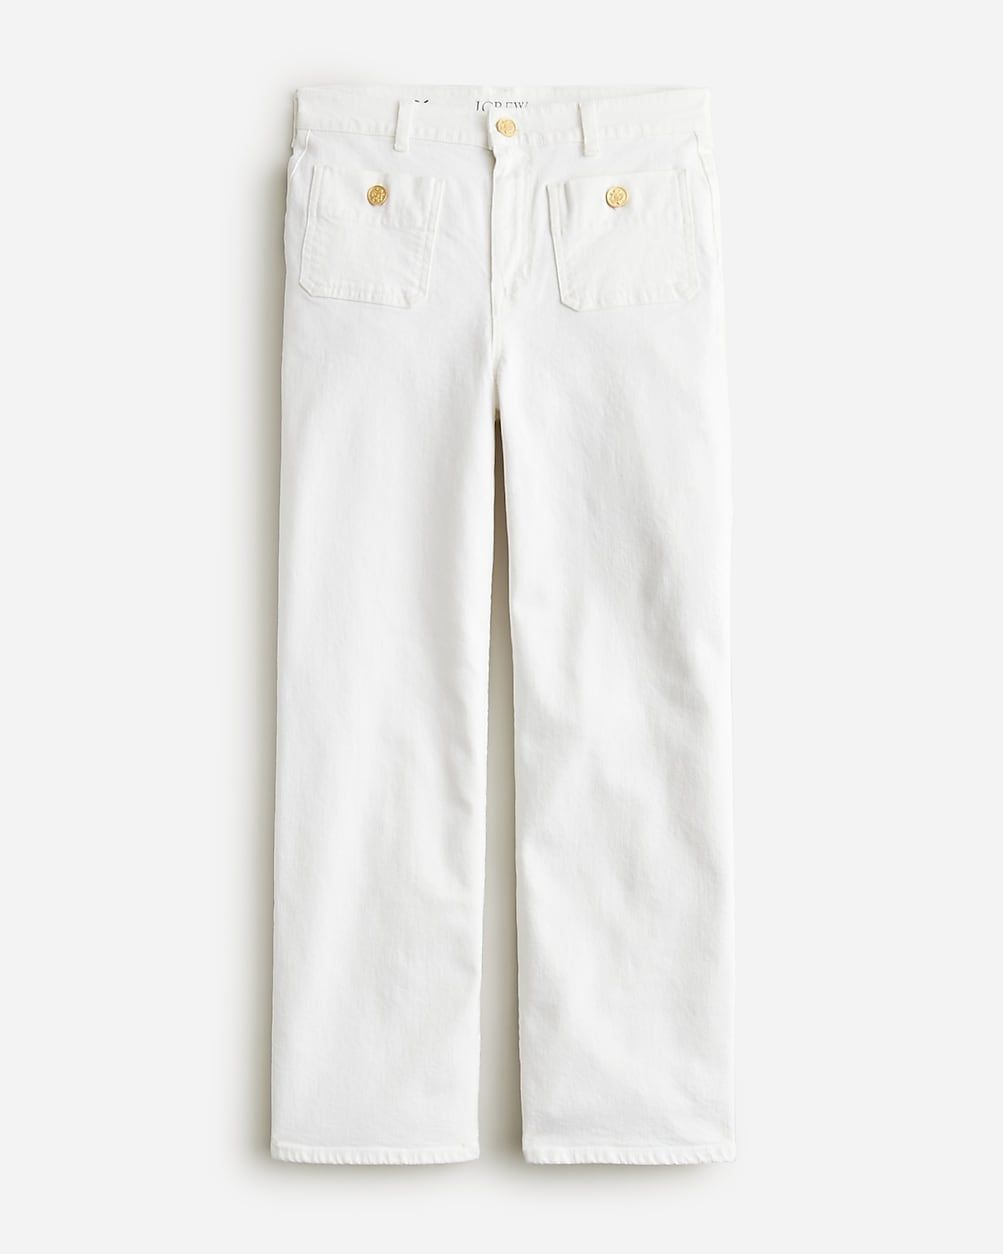 new4.8(36 REVIEWS)Sailor slim wide-leg jean in white$148.0030% off full price with code SHOP30Whi... | J.Crew US